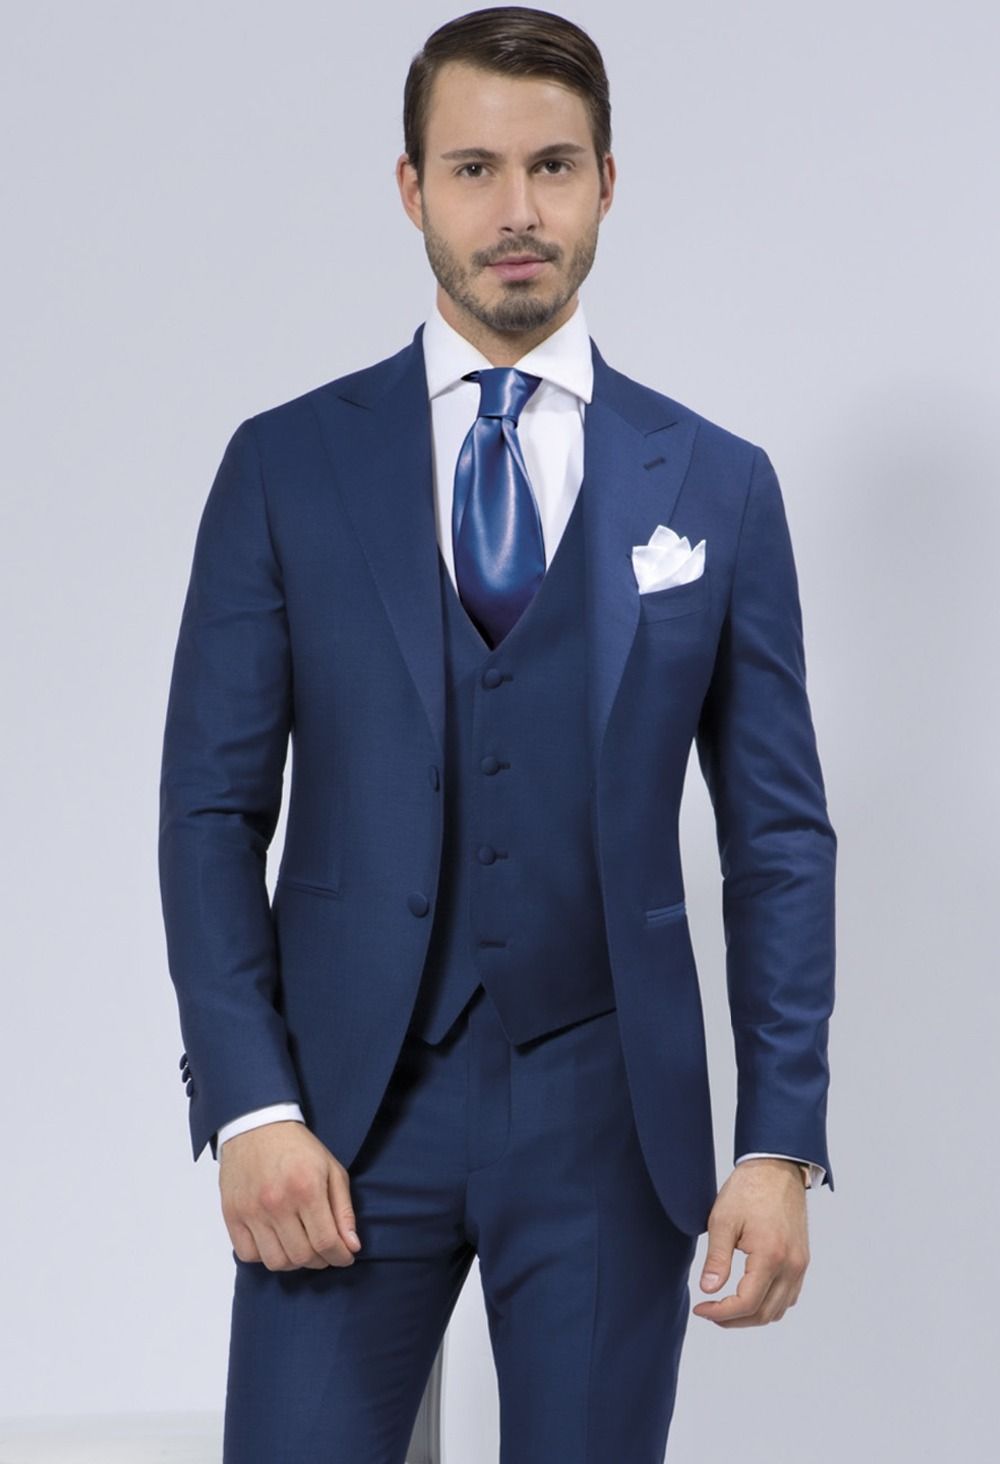 Handsome Blue Wedding Suits For Men 2015 Groomsmen Suits Tuxedos Peaked ...